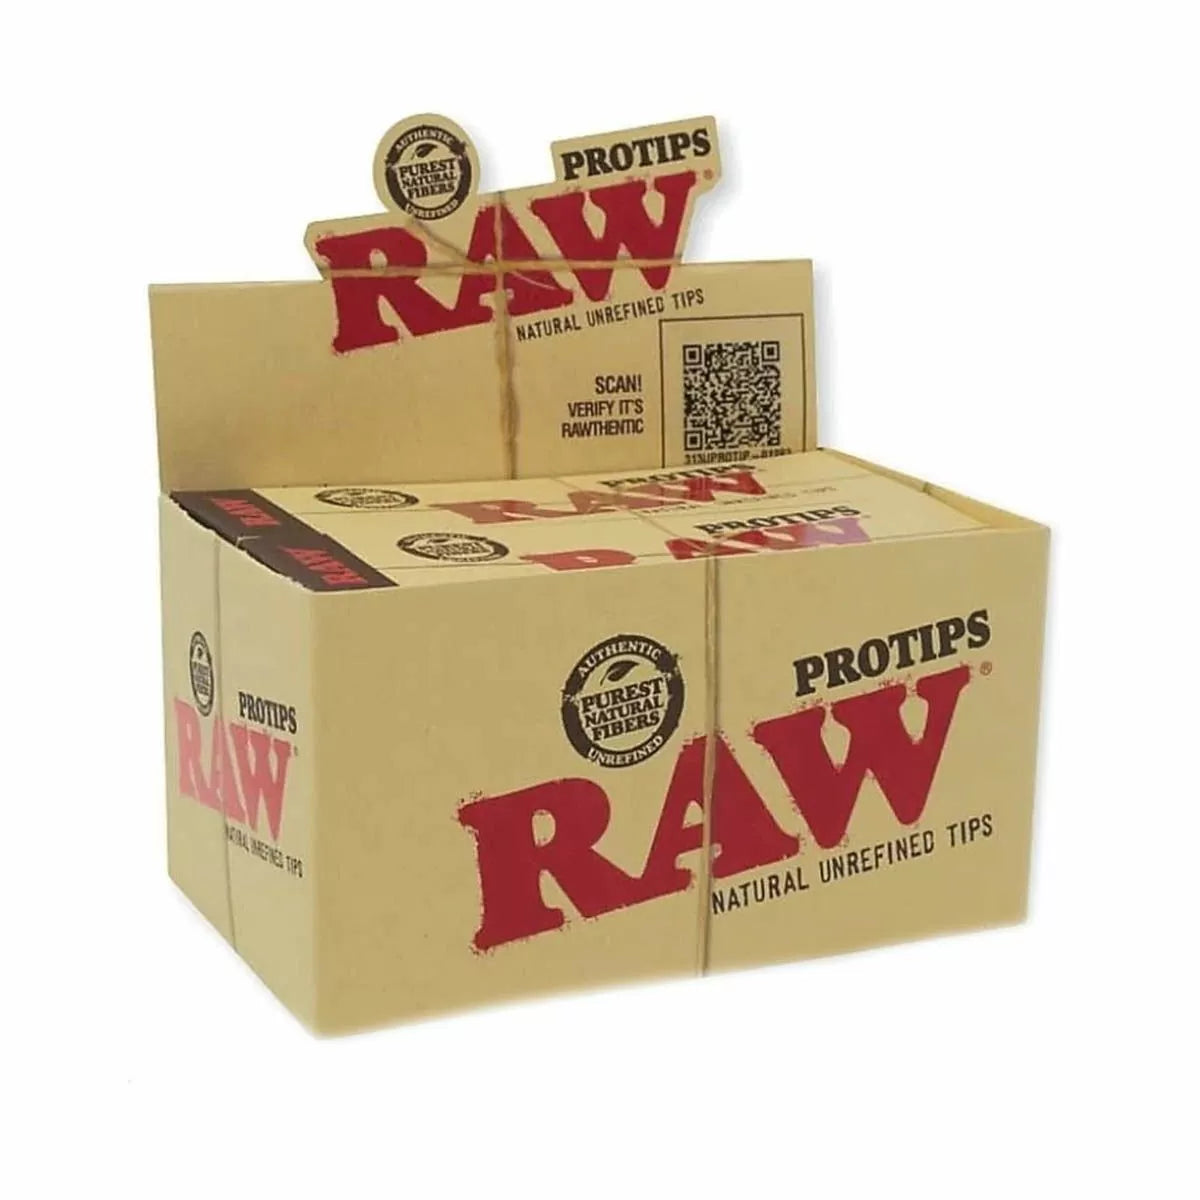 Raw Pro Tips - 21 Tips Per Pack (Single Pack or Box of 24)